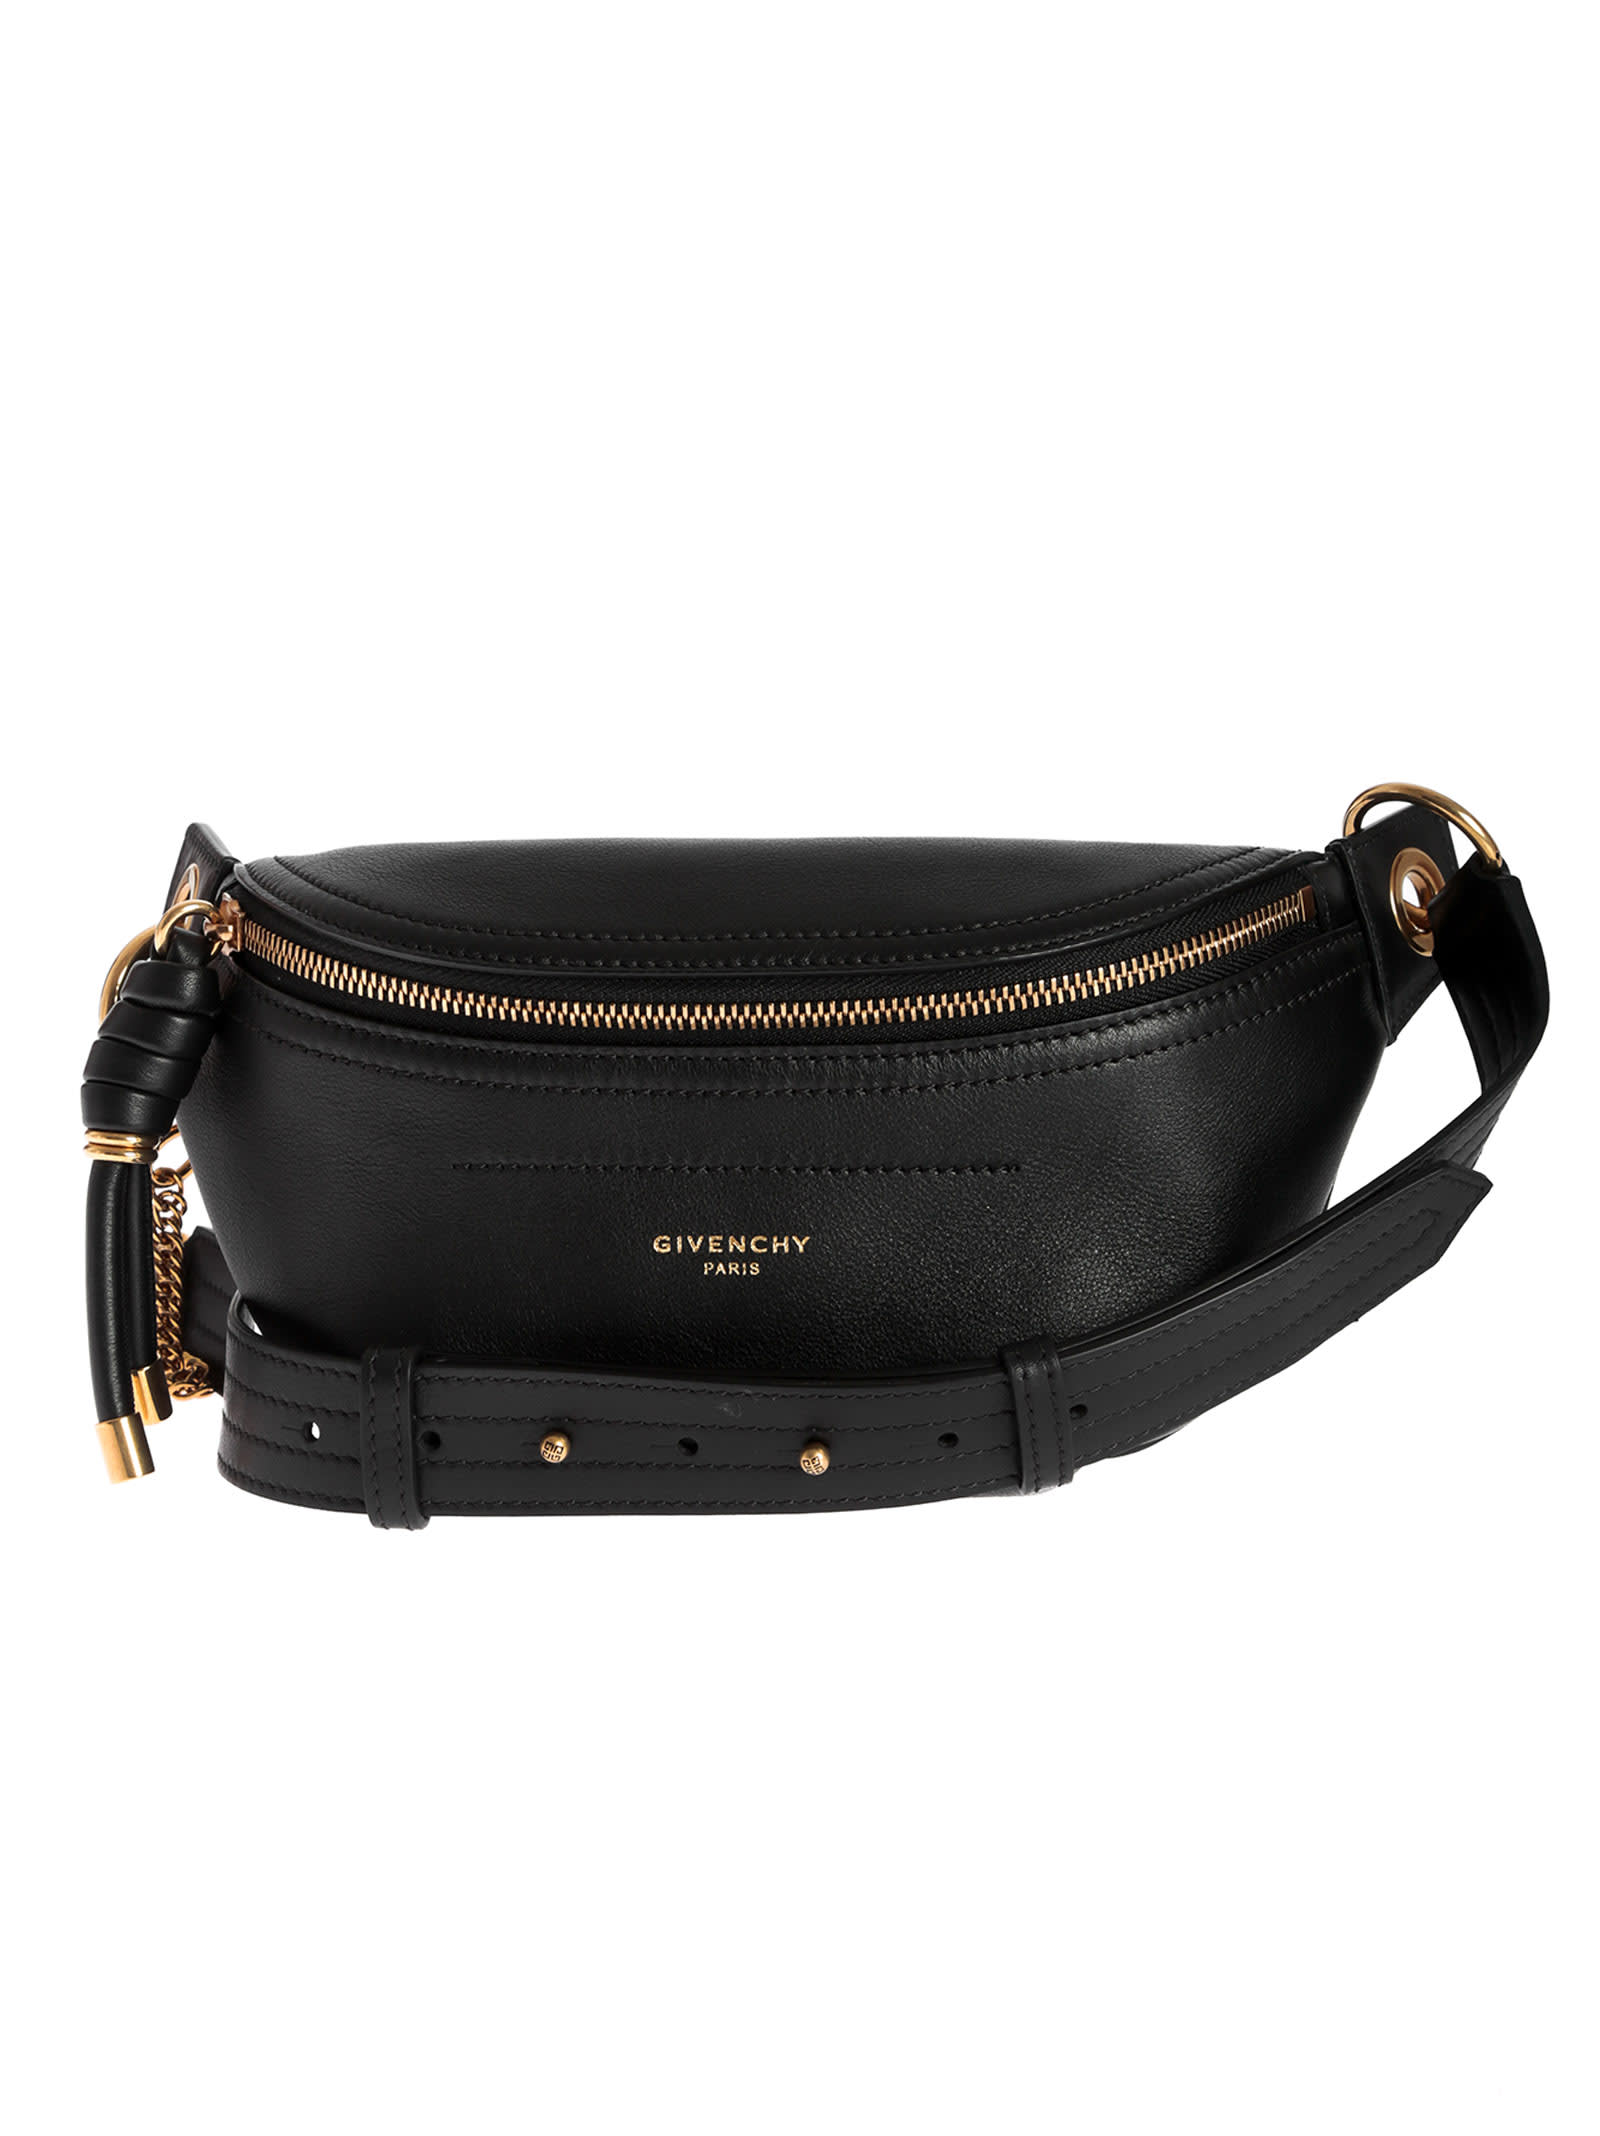 Givenchy Givenchy Whip Belt Bag - 11020638 | italist